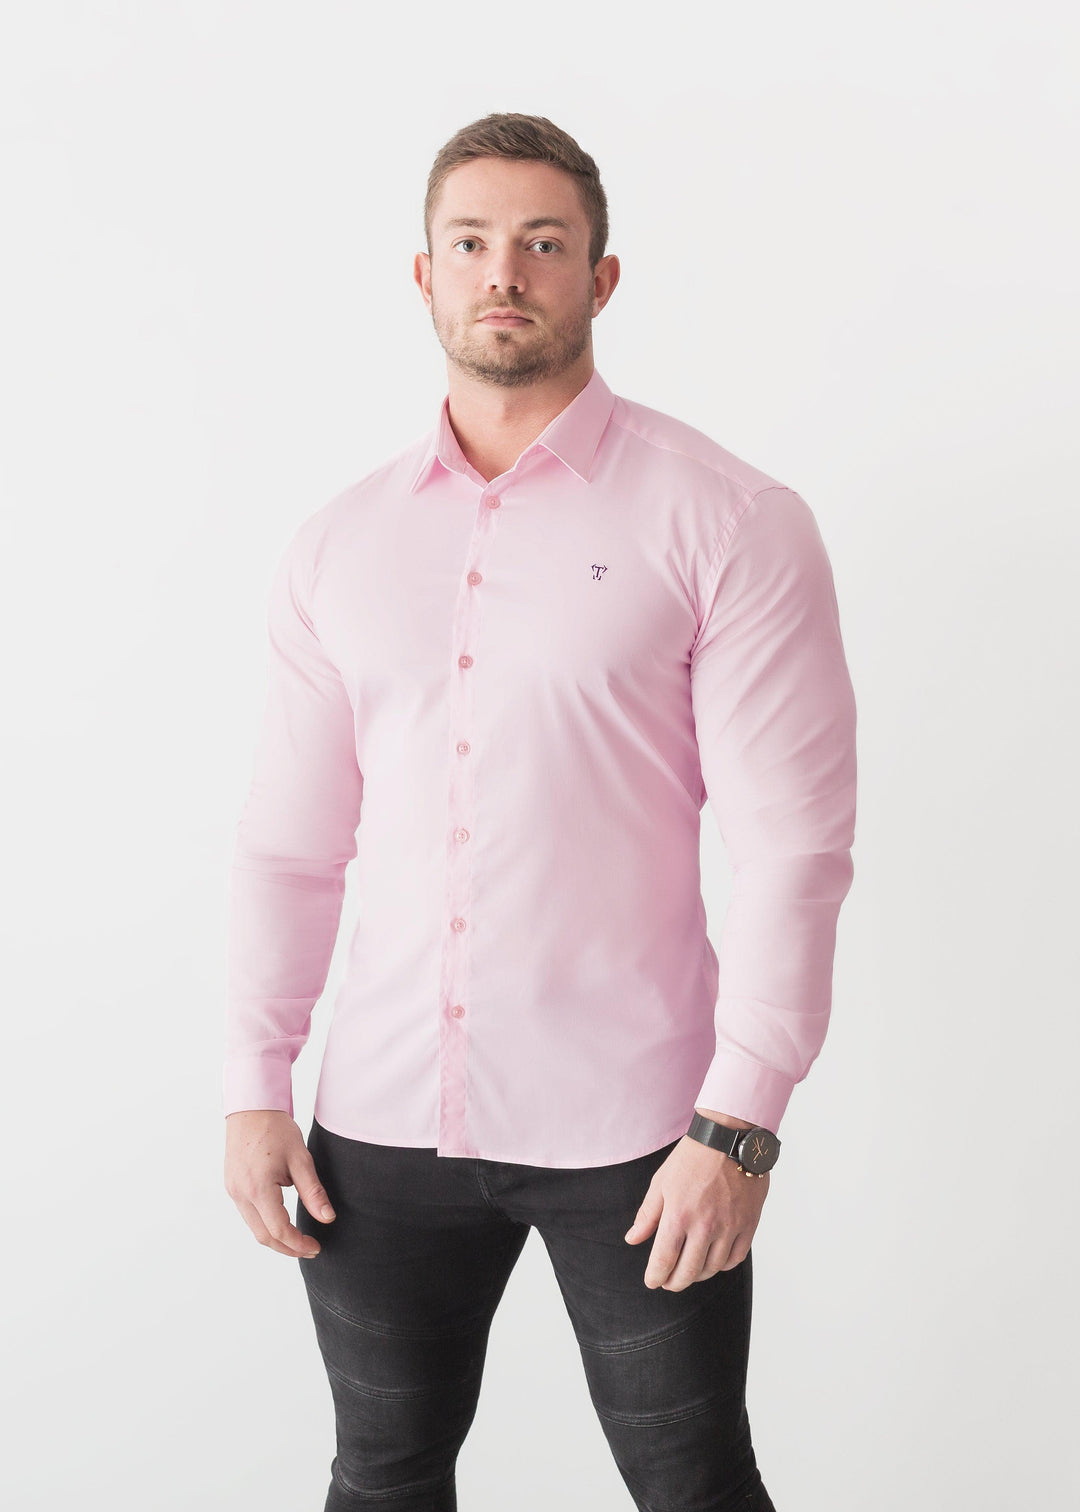 Pink Tapered Fit Shirt For Men. A Proportionally Fitted and Pink Muscle Fit Shirt. The Best Shirts For a Muscular Build.